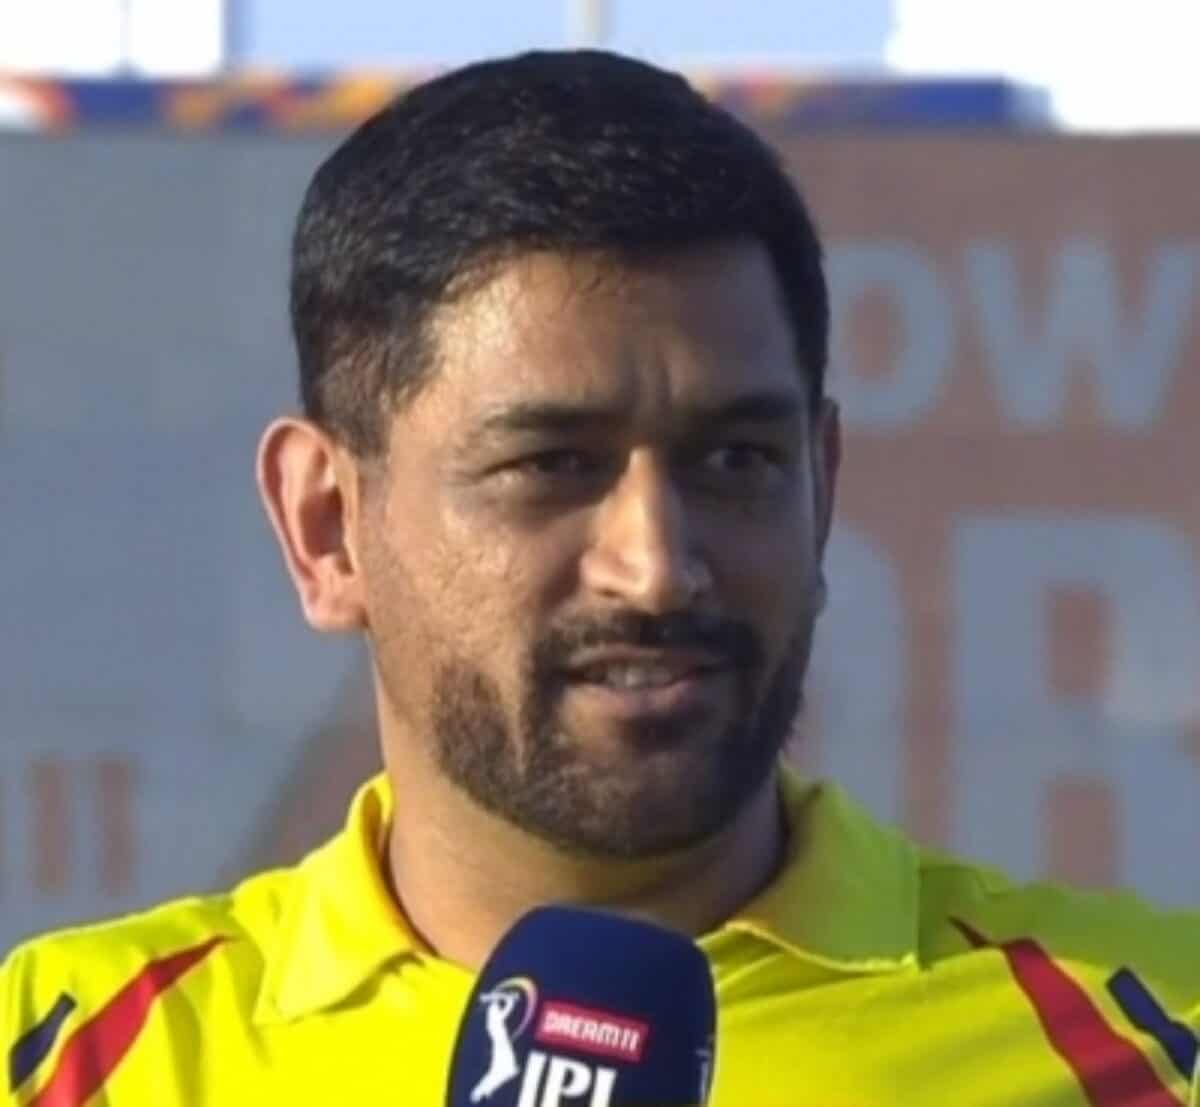 New Look Dhoni Returns To Competitive Cricket After 437 Days Briefly, dhoni got a generic hairstyle. competitive cricket after 437 days